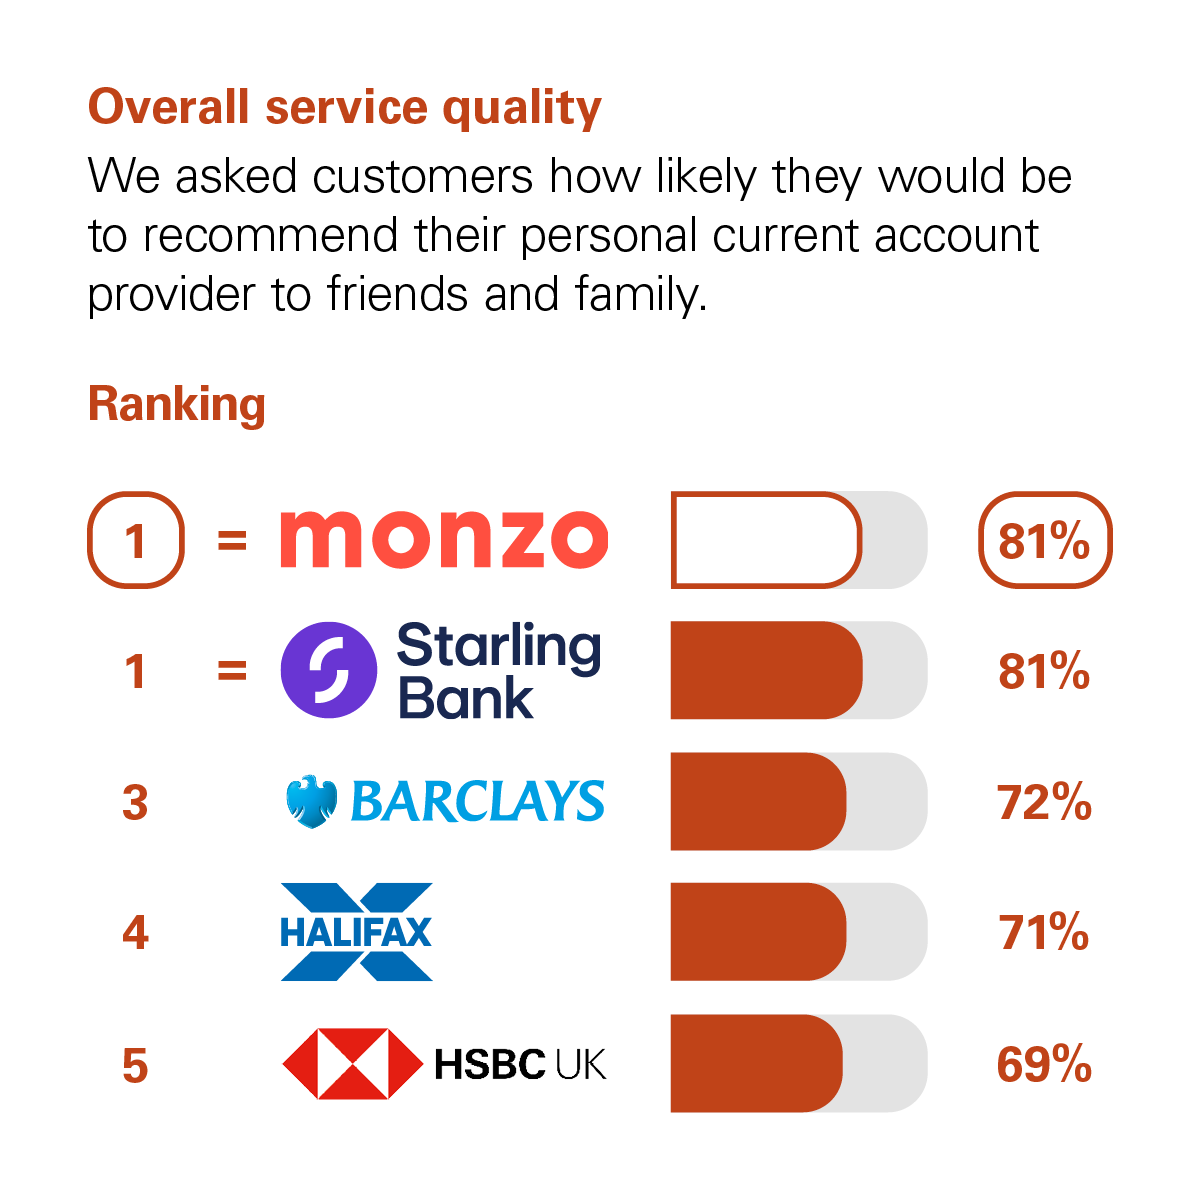 Graph showing the results of the CMA scoring of UK banks in the Overall Service Quality category. The CMA asked customers how likely they would be to recommend their personal current account provider to friends and family. The rankings with percentage scores are: Joint 1st are Monzo and Starling Bank with 81%. 3rd Barclays with 72%. 4th Halifax with 71%. 5th HSBC UK with 69%.